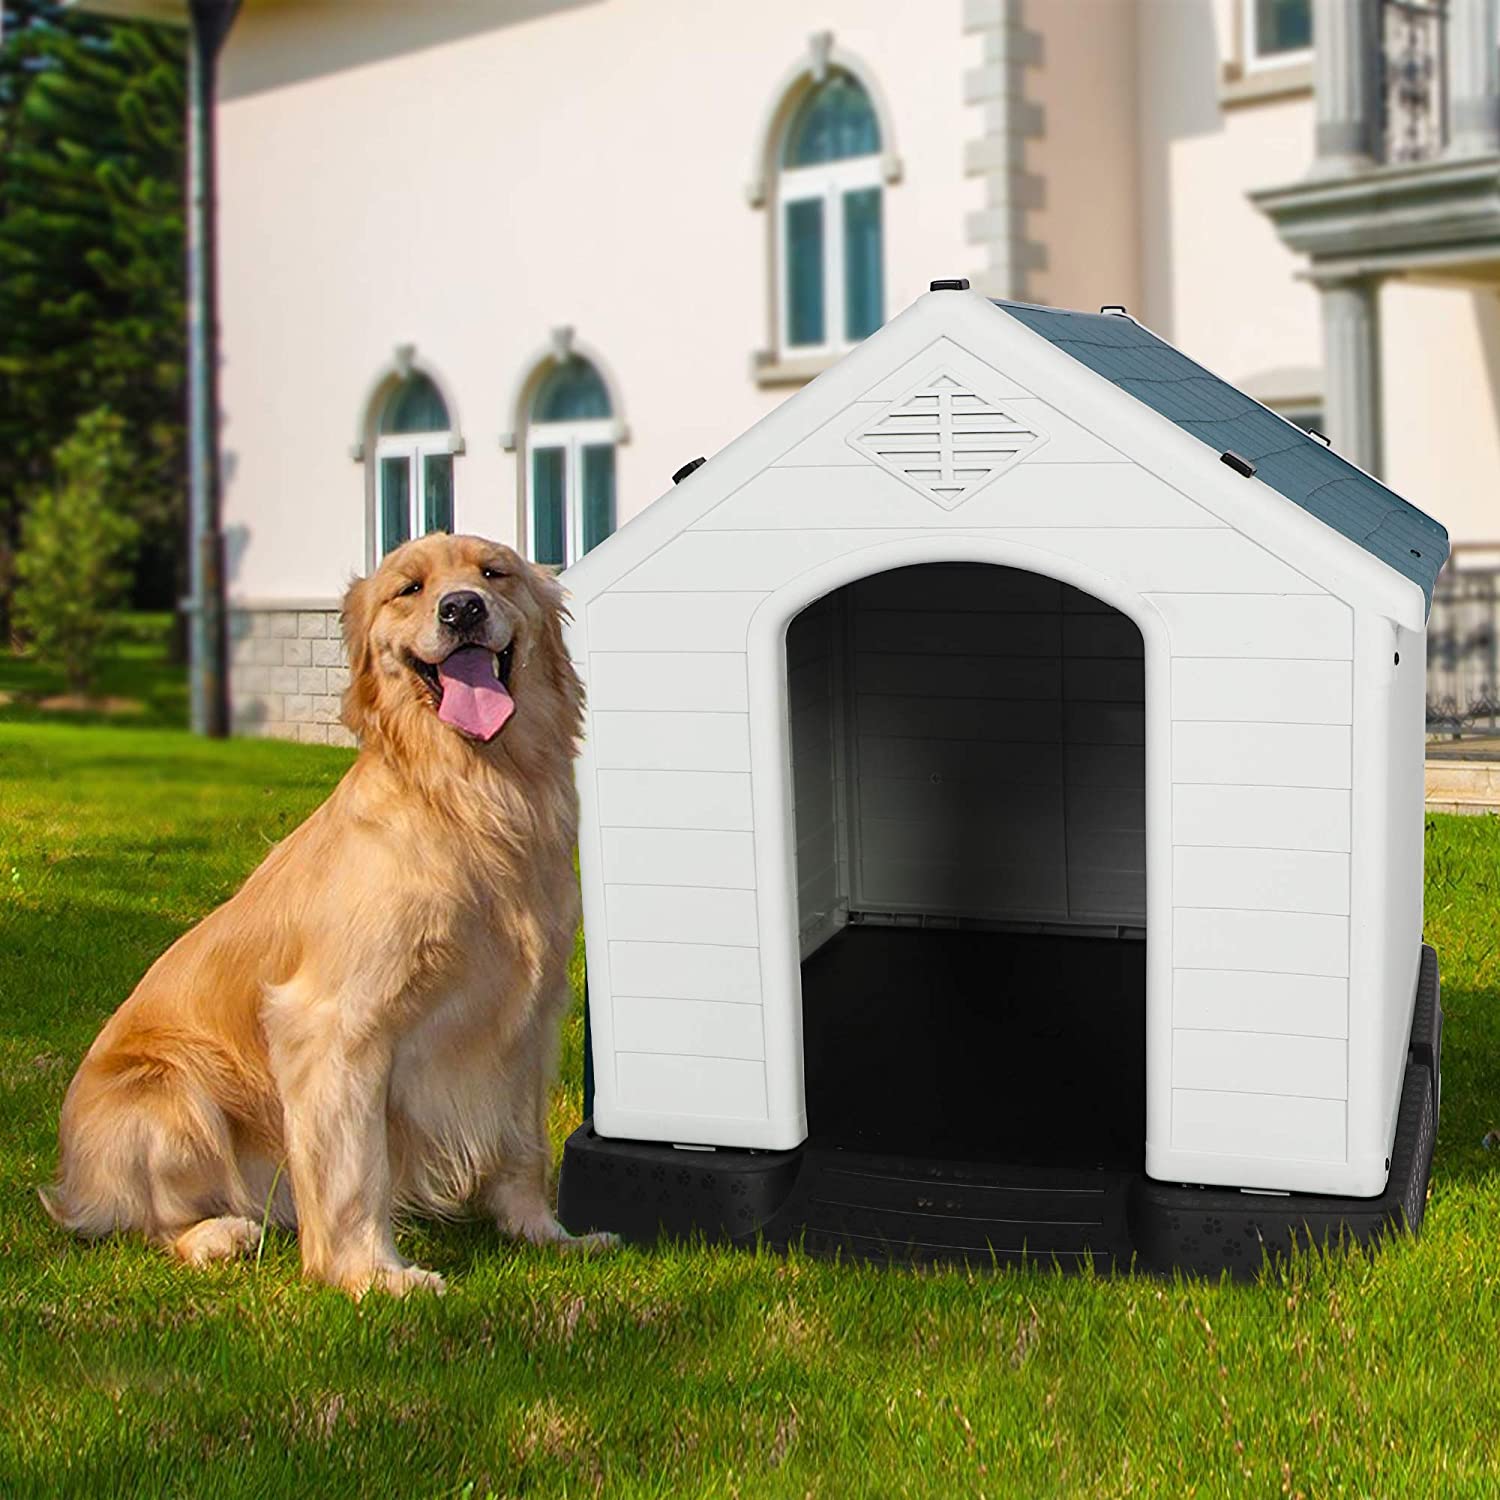 Dog House Outdoor Plastic Weatherproof Kennel House with Elevated Floor, 35.5" L x 37.5" W x 39"H